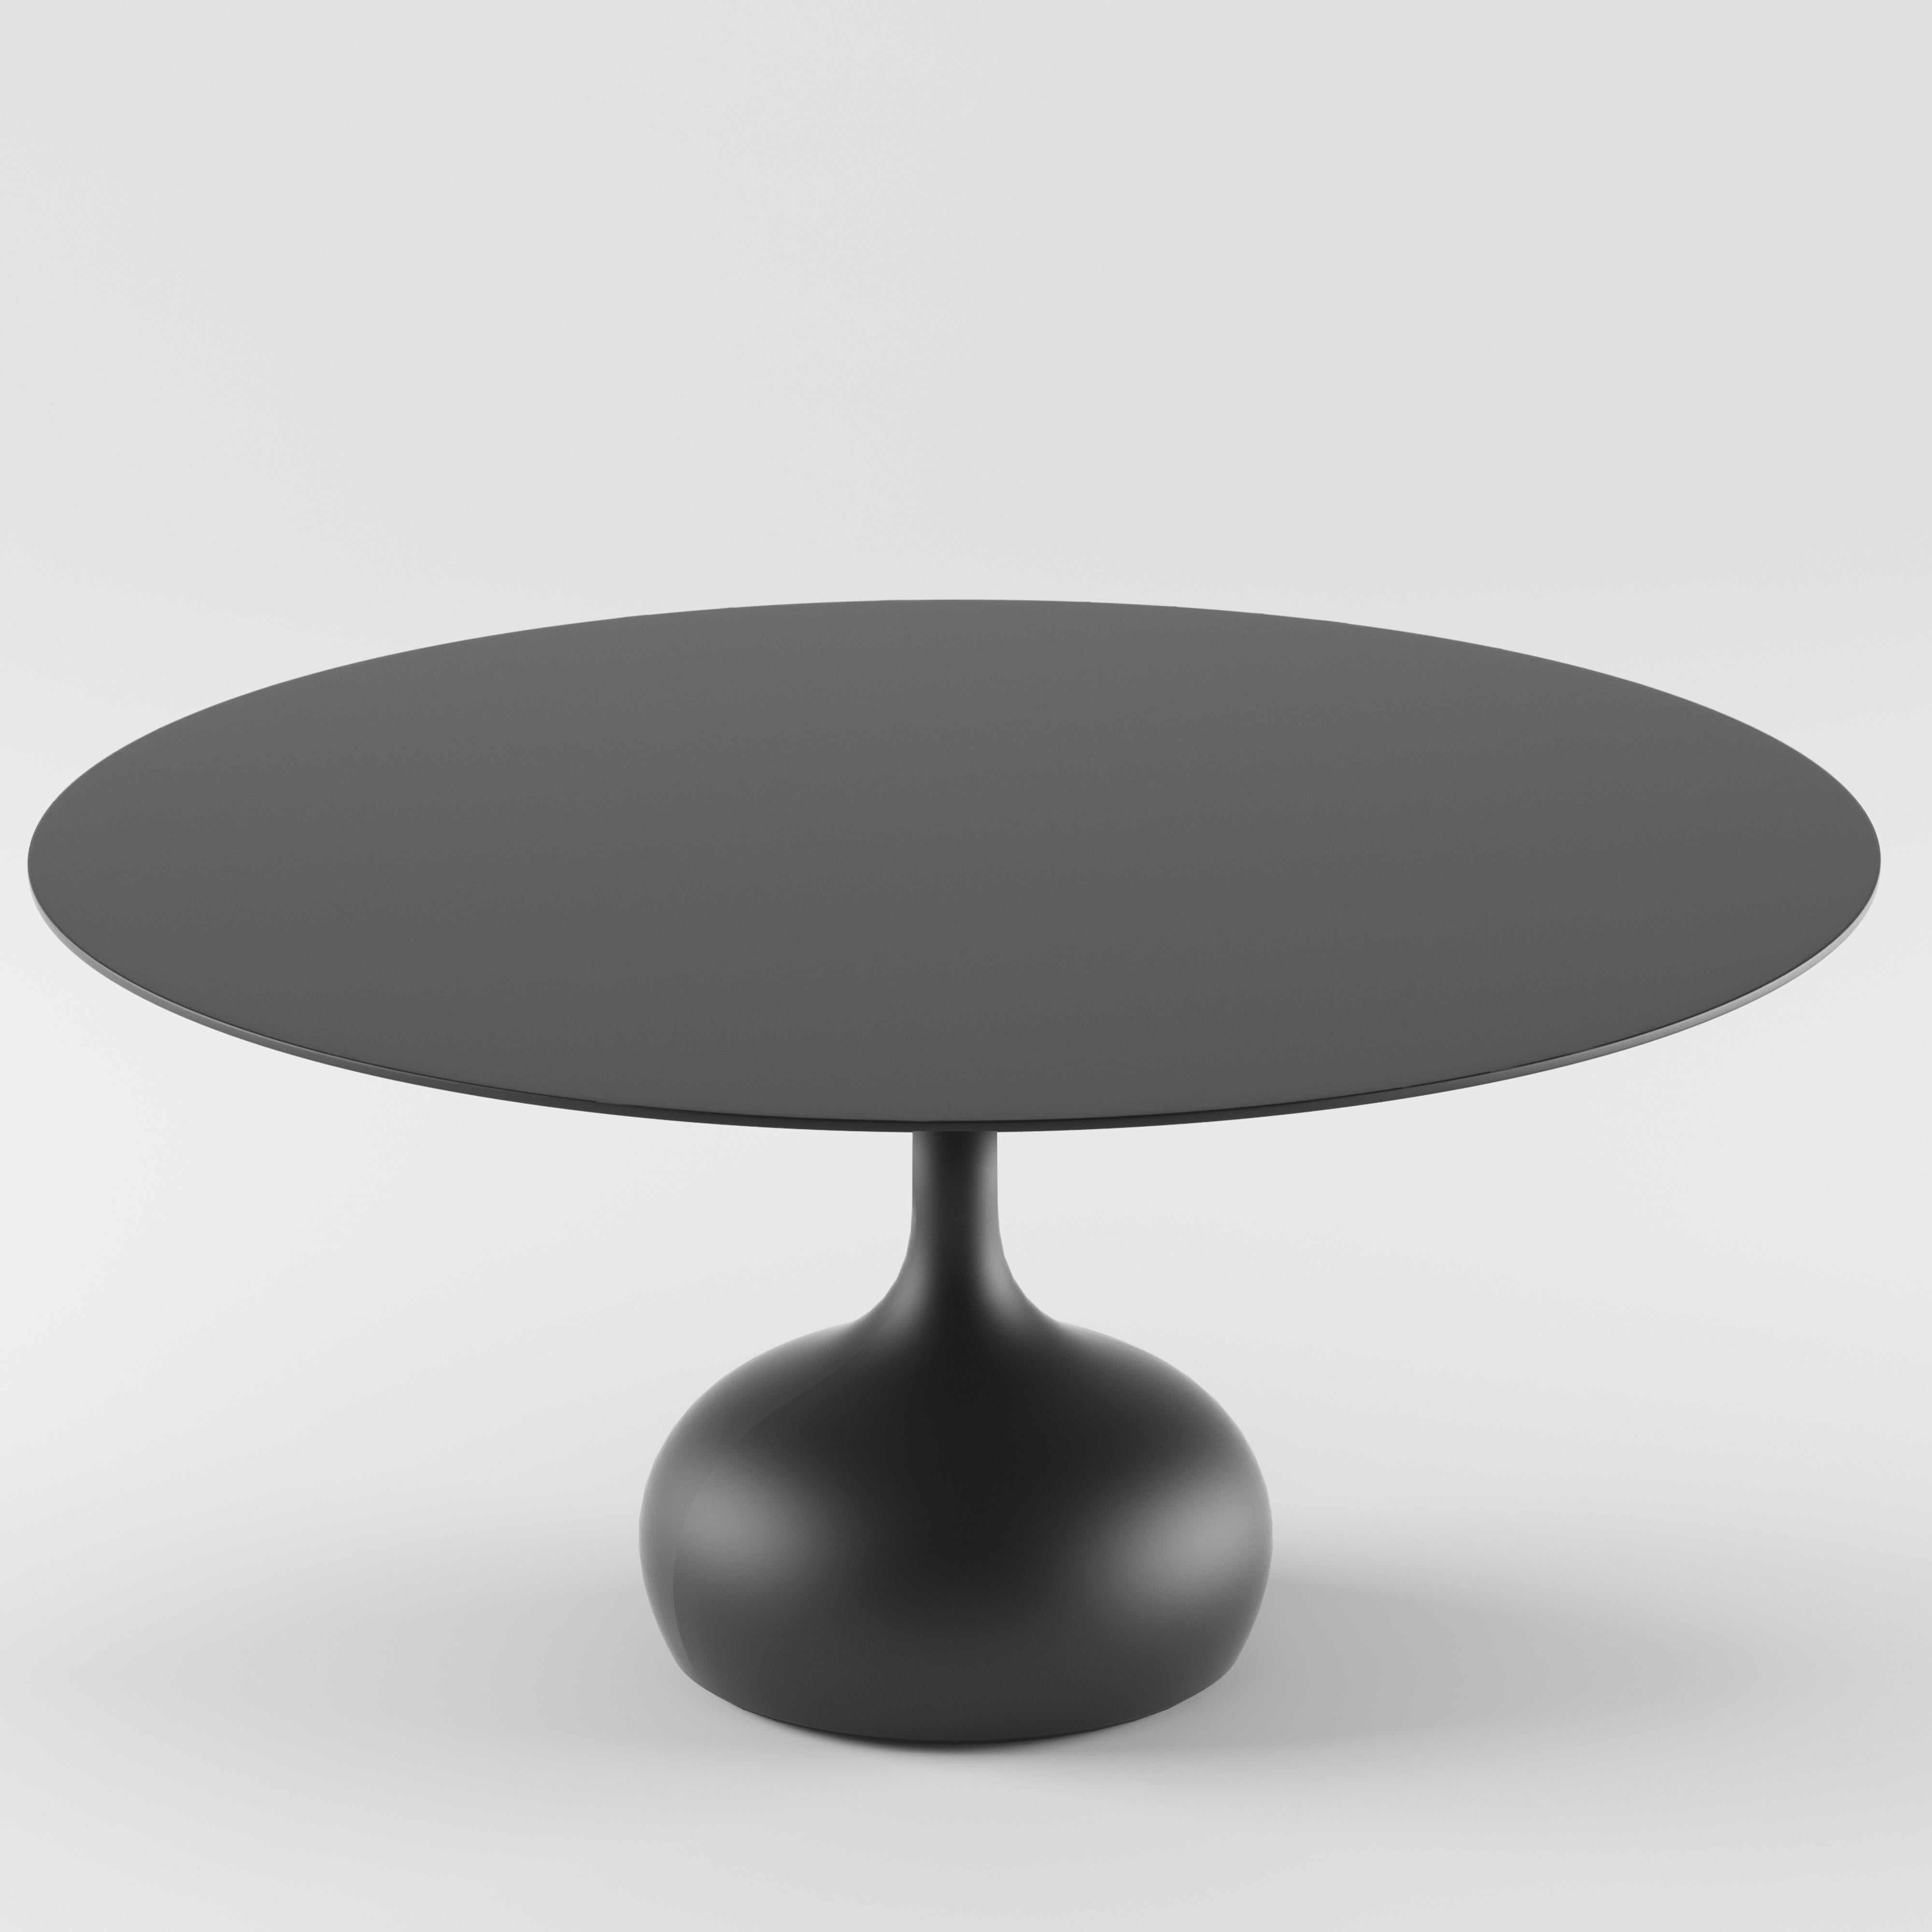 Alias 011 Saen Table Ø160 in Black Lacquered MDF Top by Gabriele e Oscar Buratti

Table with ballasted base in lacquered polyurethane and round top in lacquered MDF.

The architects Gabriele and Oscar Buratti, members of the studyBuratti Architetti,